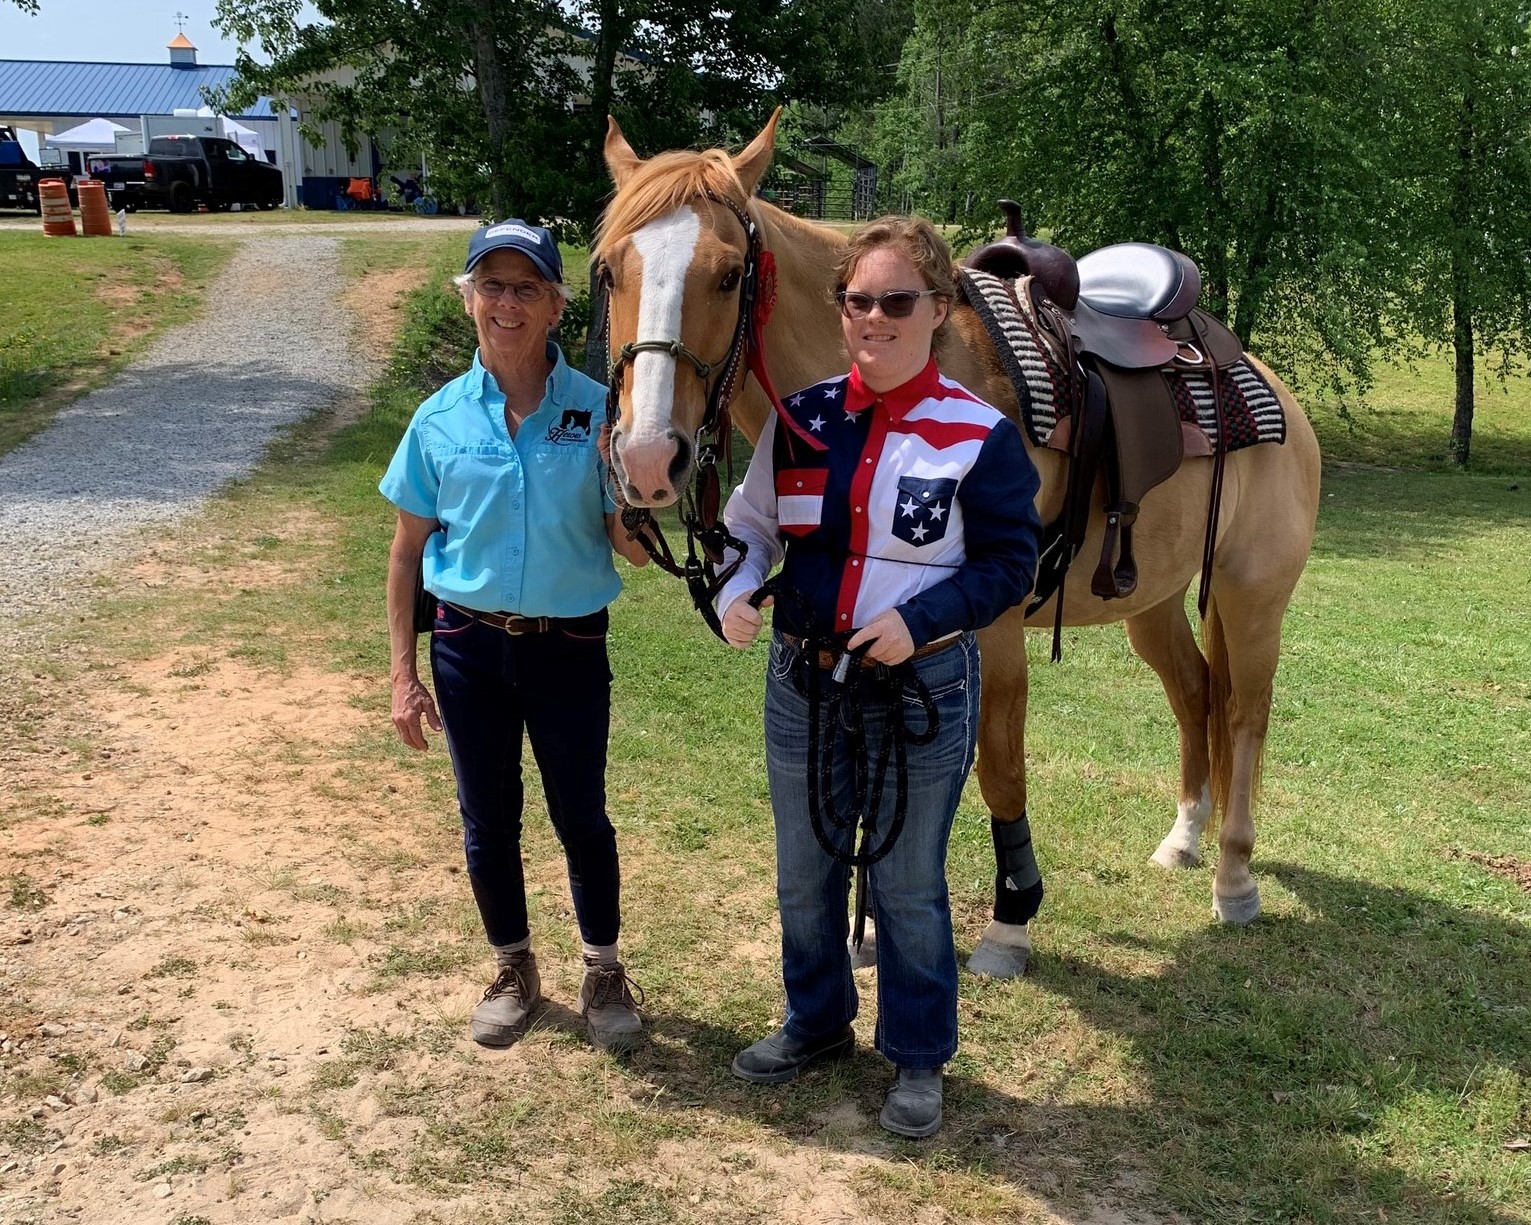 Photo of Heroes on Horseback staff member and rider both posing with horse outdoors